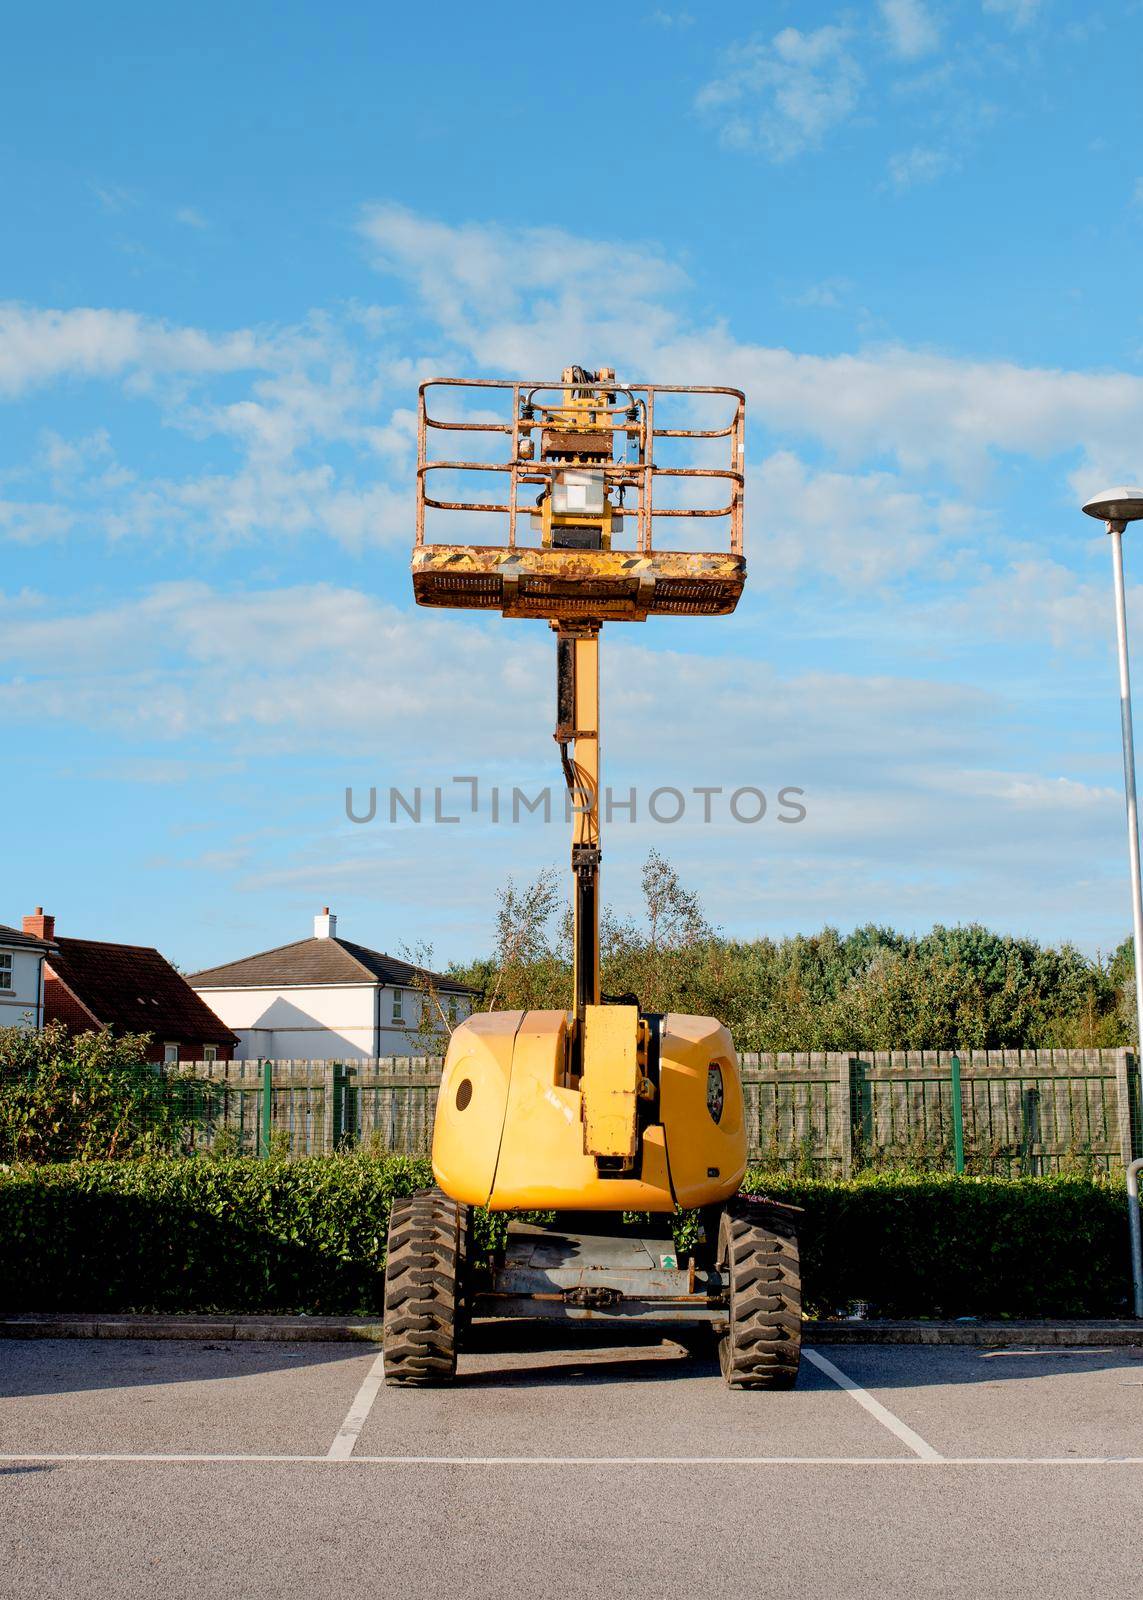 Telescopic boom lift raised up on blue sky background delivered to construction site ready to be used by steel frame erectors, roofers and painters on parking by Iryna_Melnyk